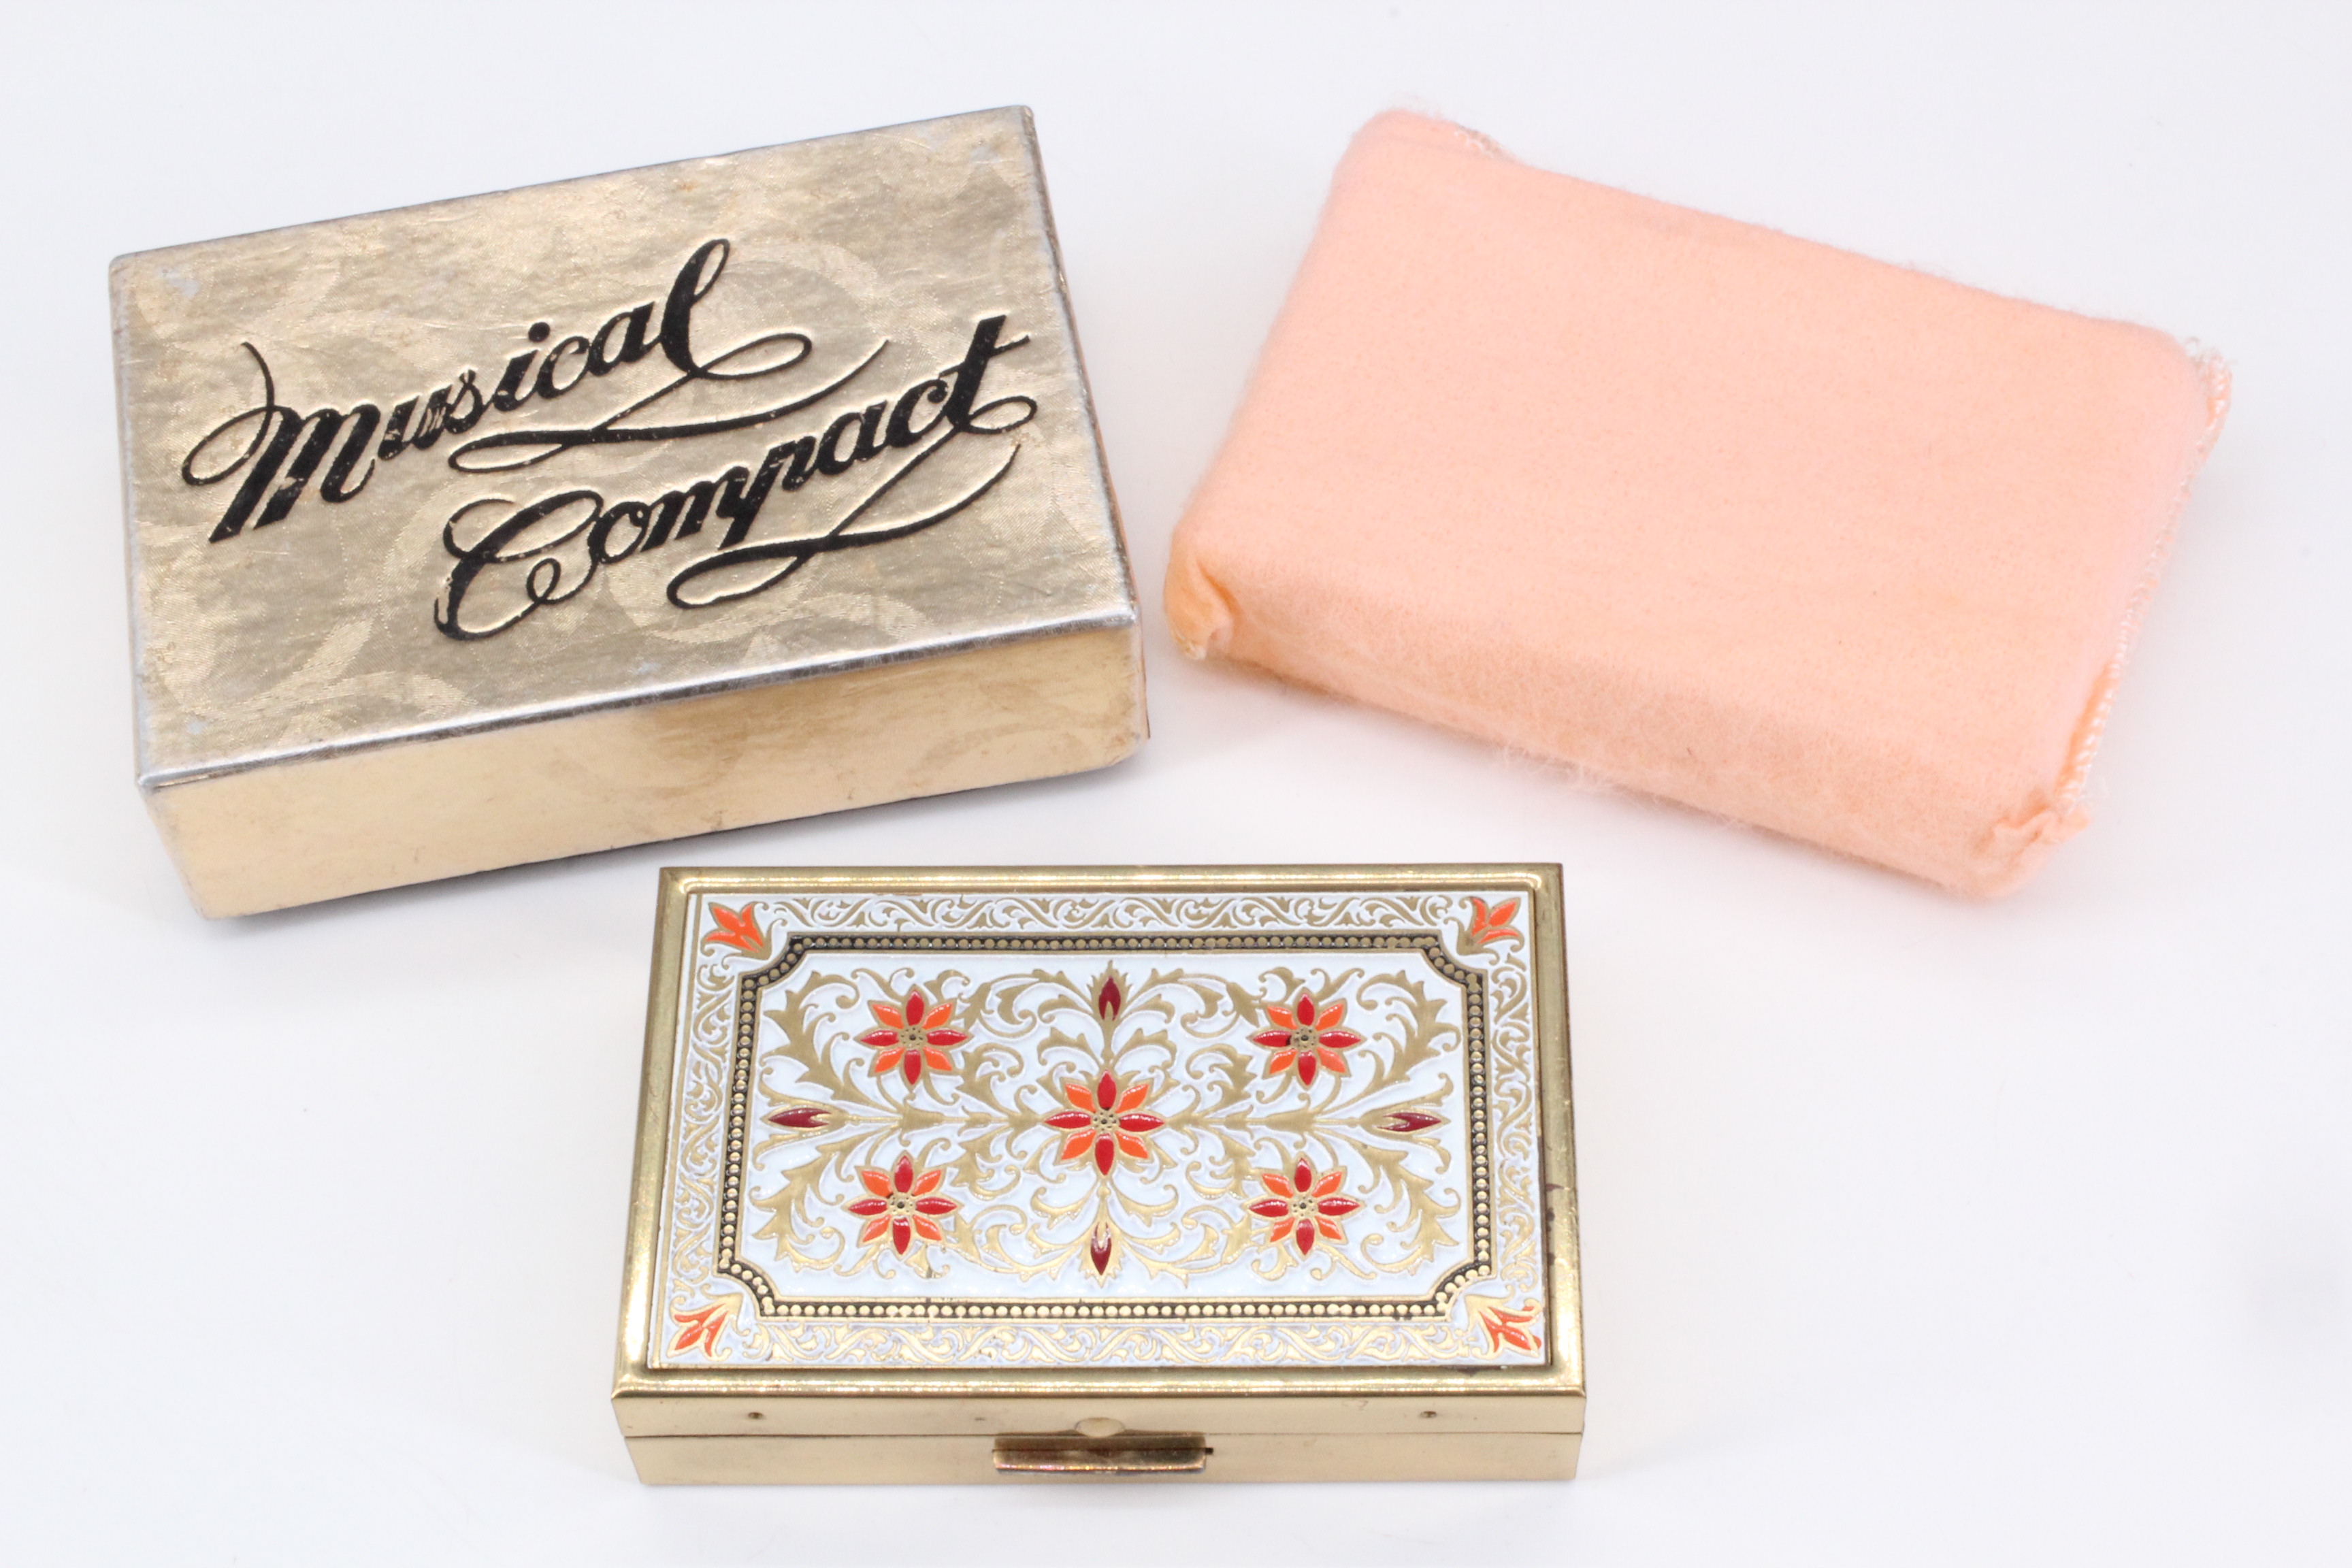 A Japanese musical compact, in its original box and protective cloth case, unused, 7.5 cm x 5 cm x 2